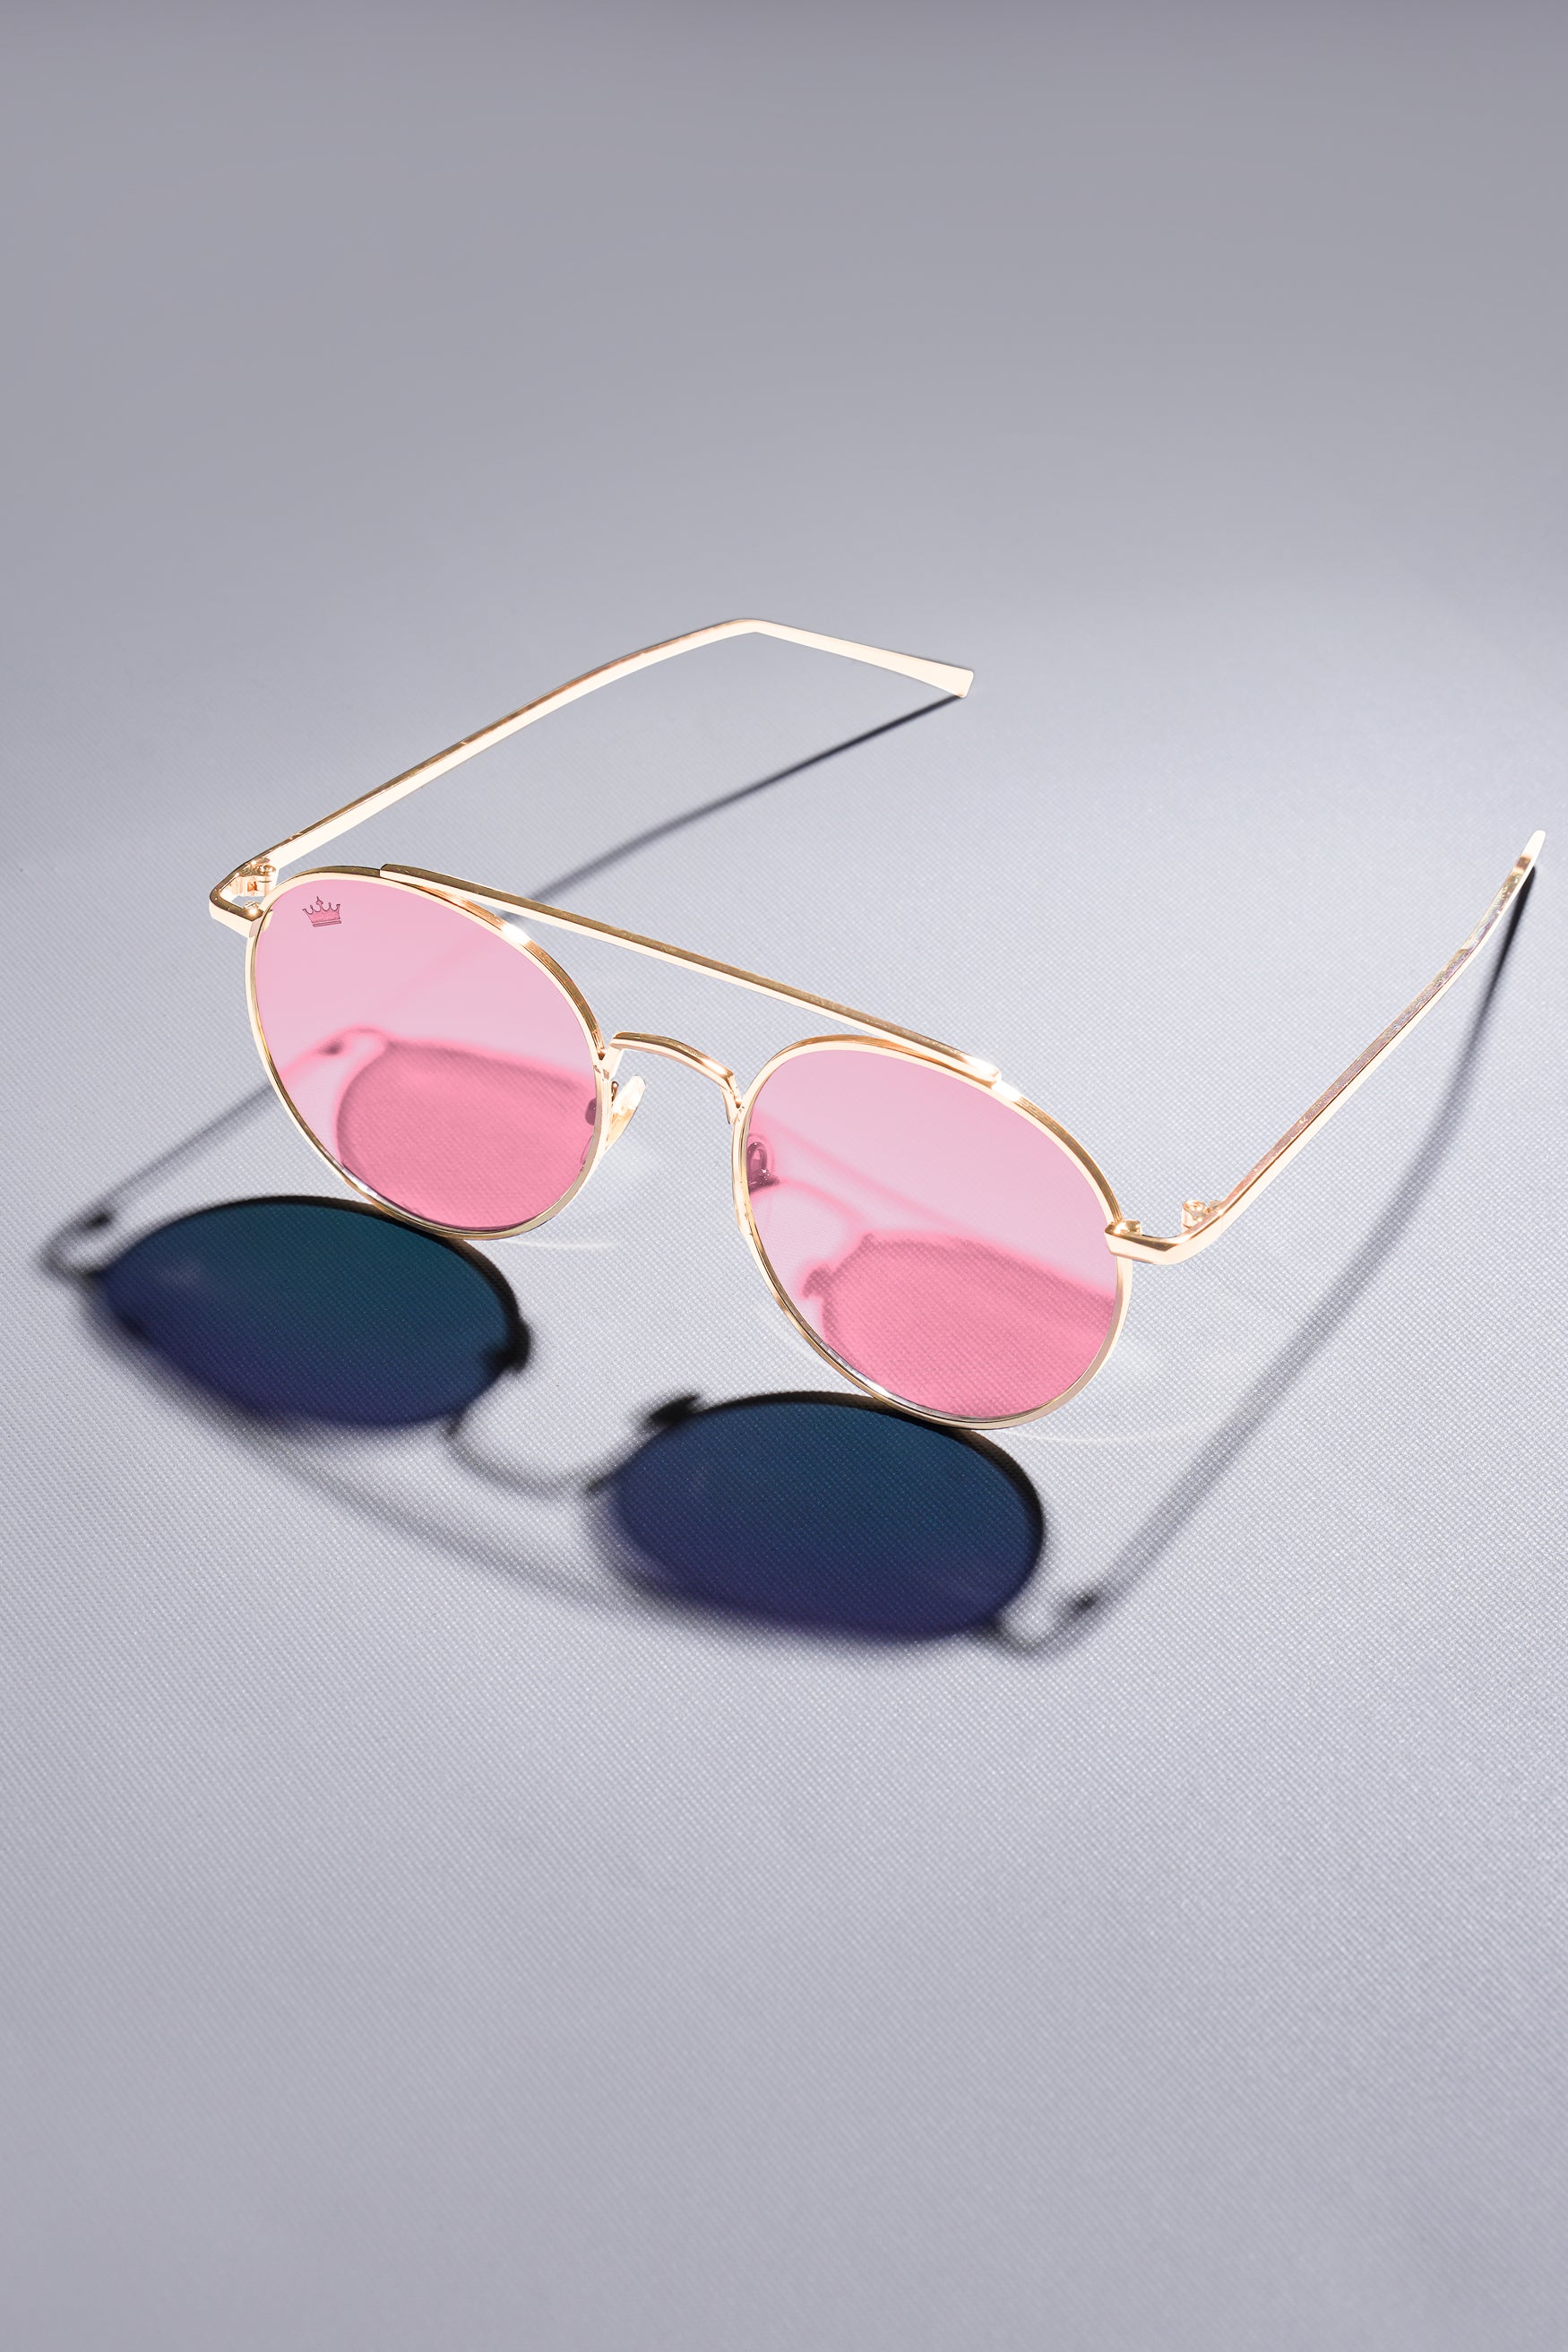 Dusty Pink French Crown Round-Shaped Women’s Sunglasses